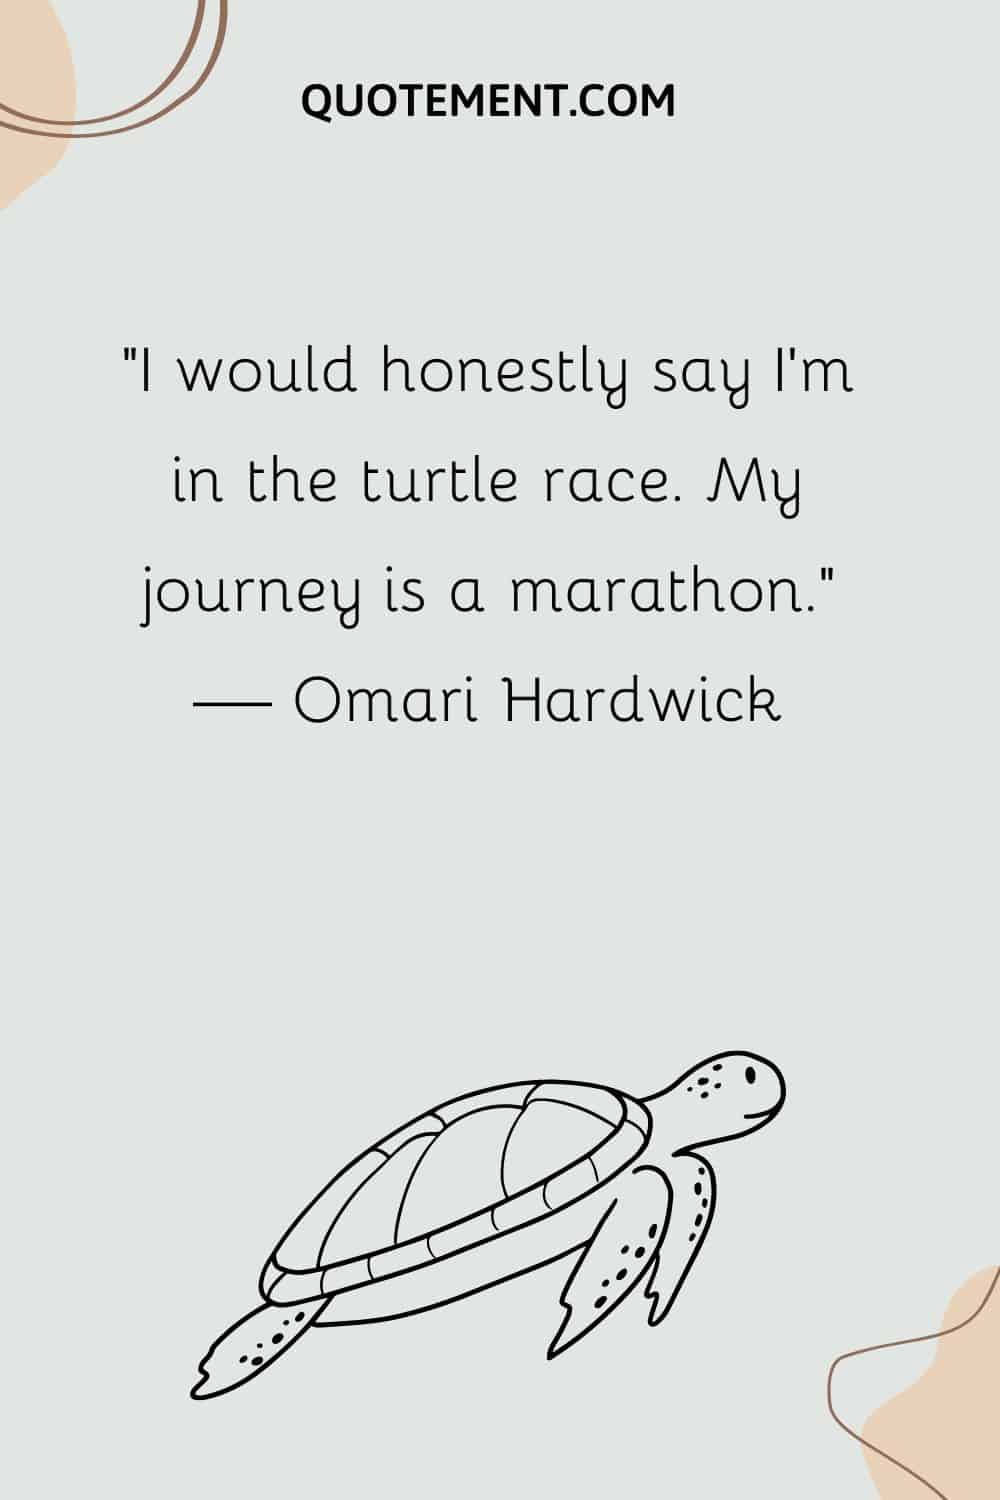 I would honestly say I'm in the turtle race. My journey is a marathon